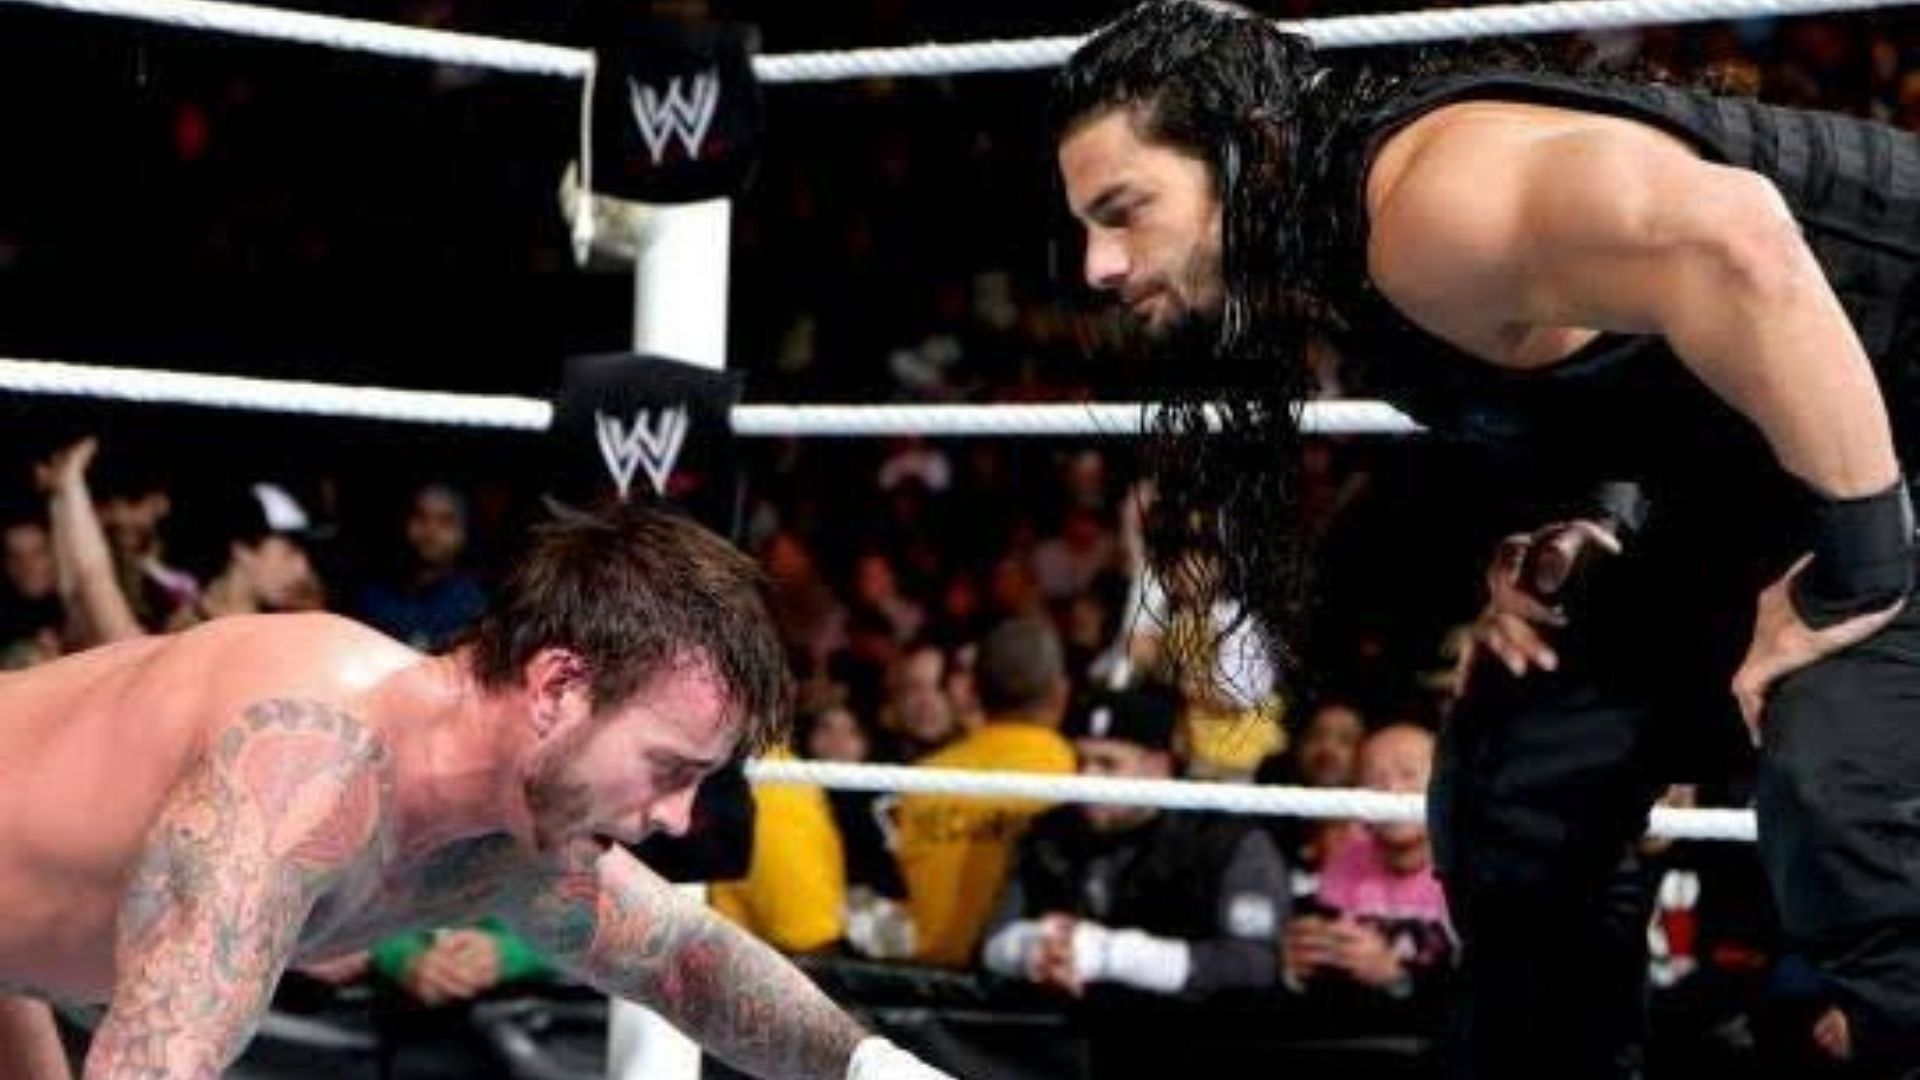 Wrestling personalities, CM Punk and Roman Reigns